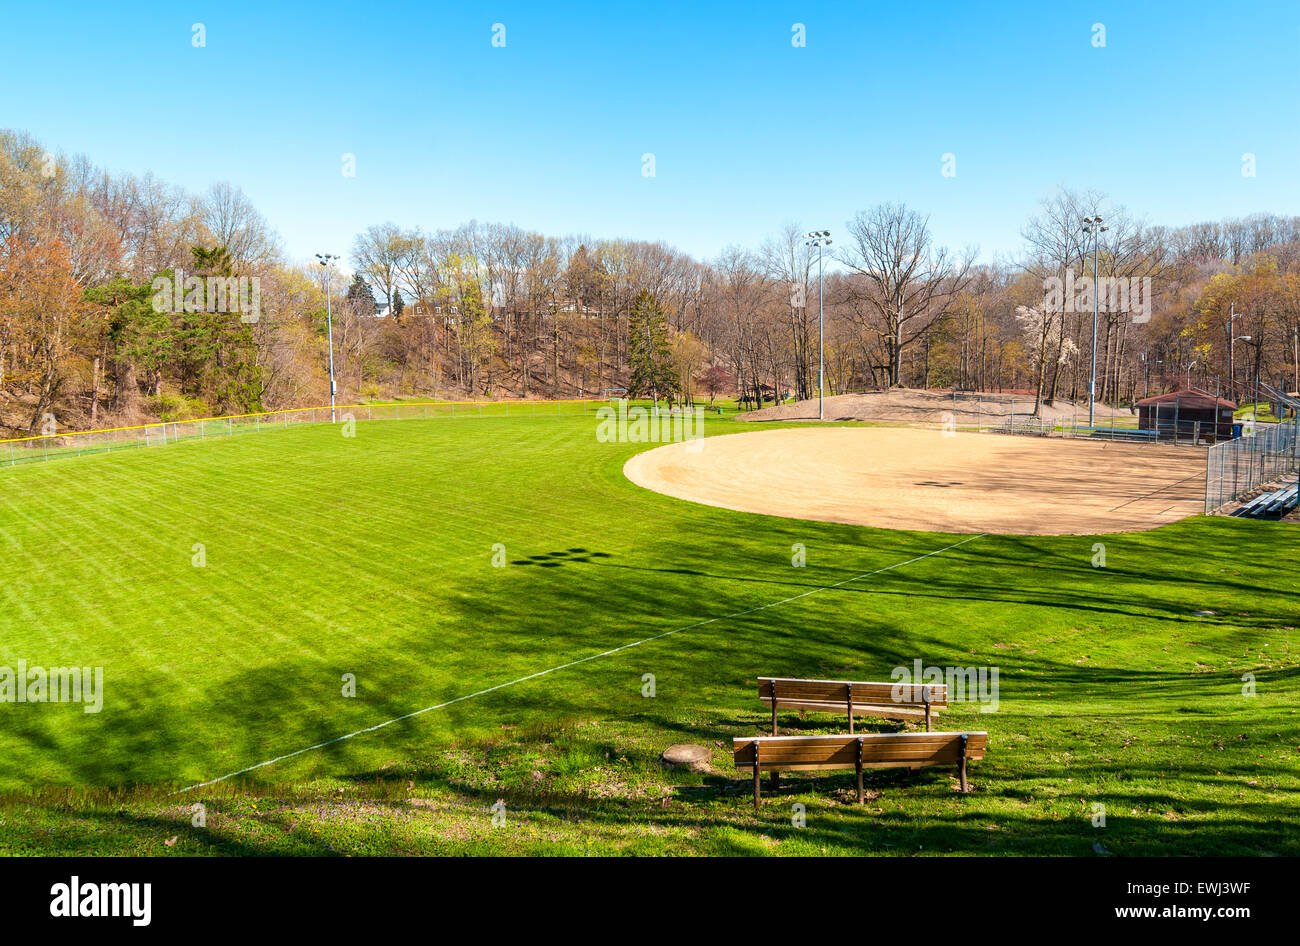 A community baseball field in a picturesque setting Stock Photo